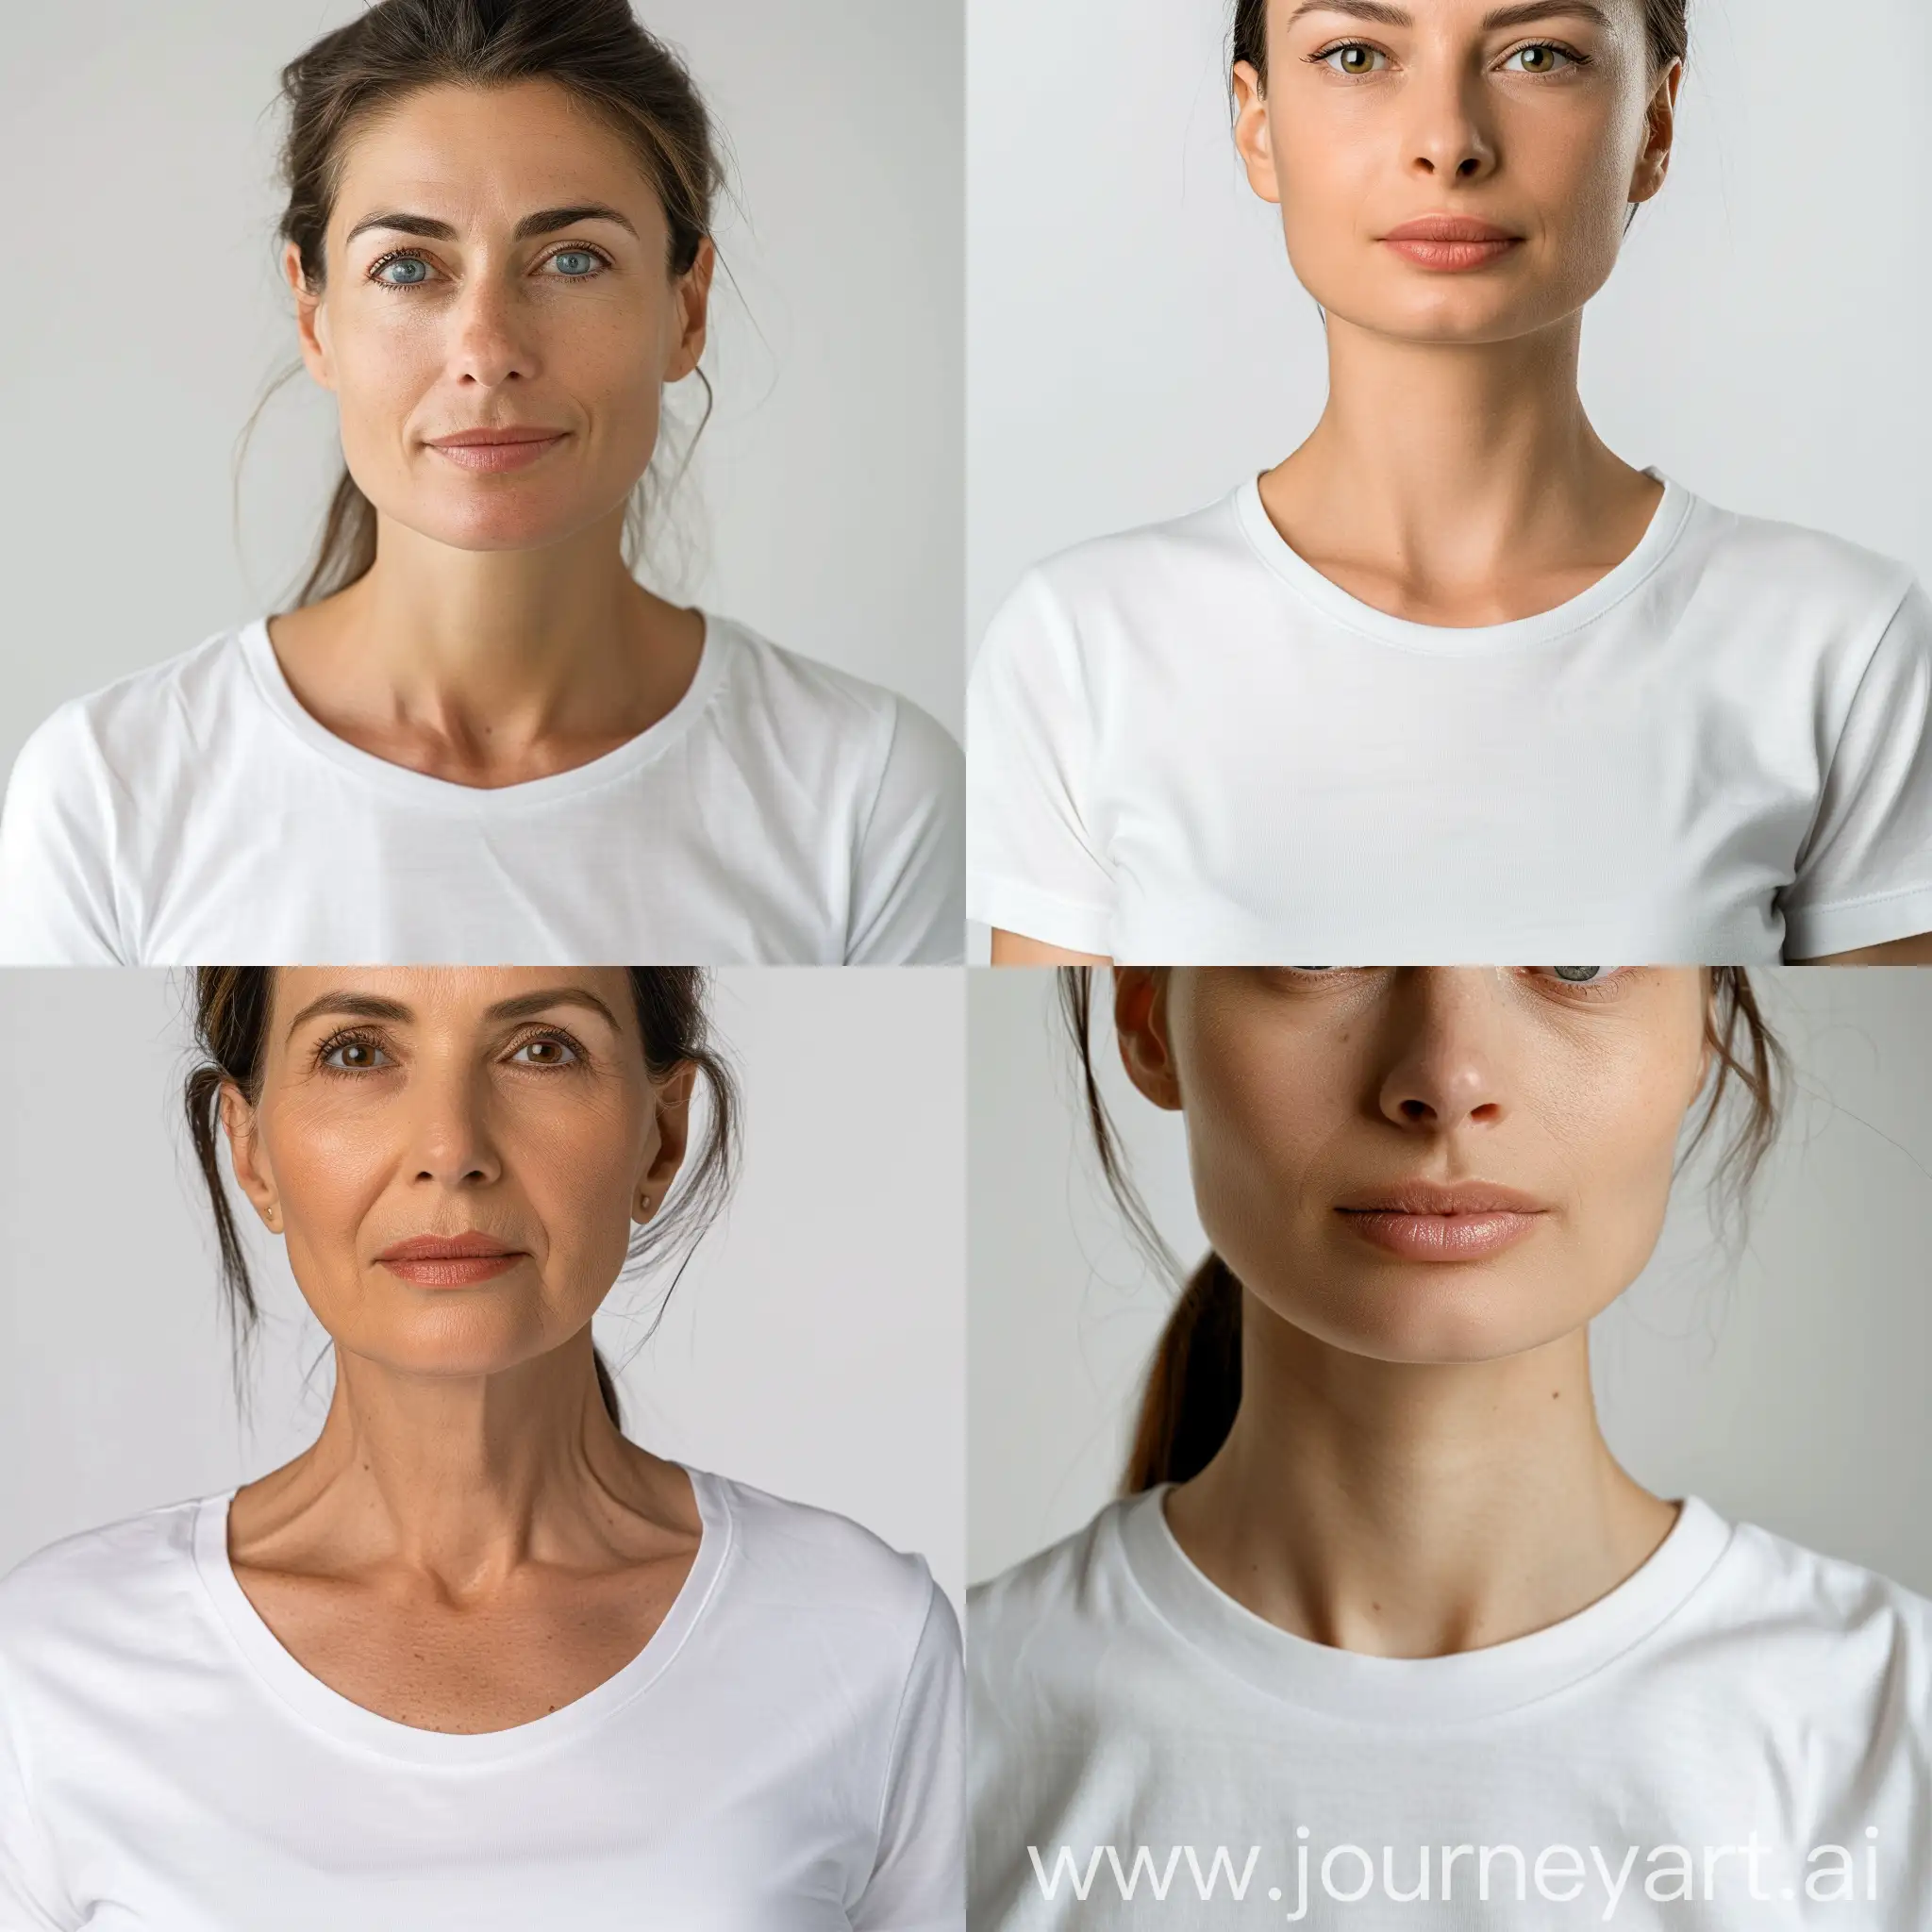 Portrait-of-a-40YearOld-Woman-in-White-TShirt-with-Hair-Tied-Back